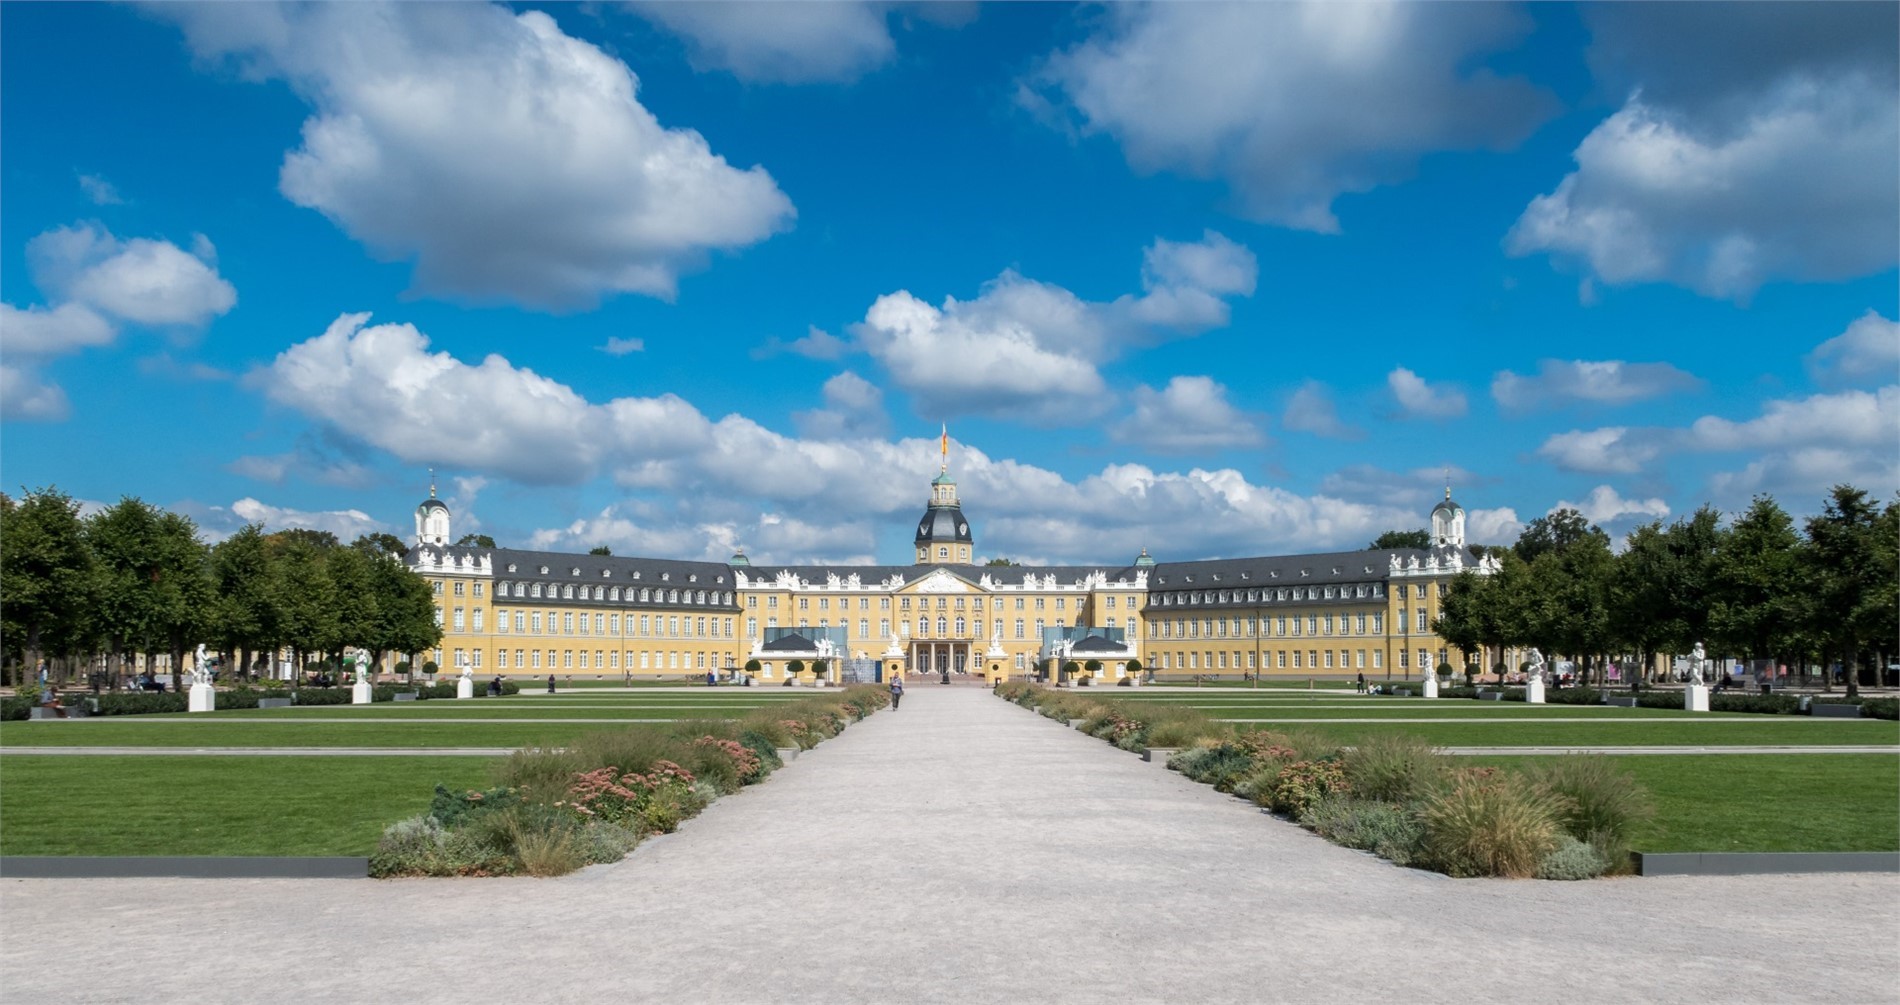 Hotels and accommodation in Karlsruhe, Germany